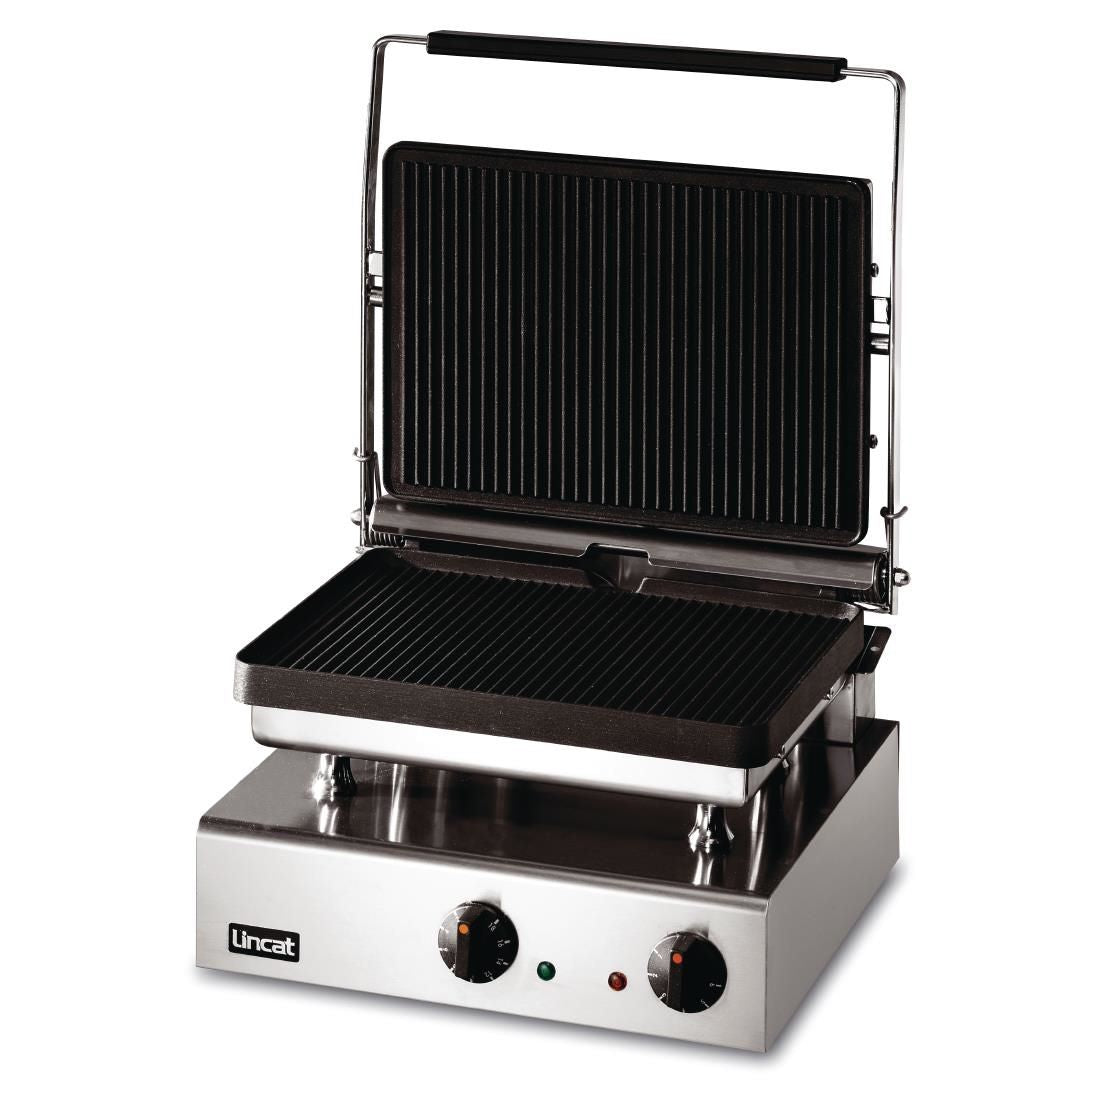 GG1P - Lincat Lynx 400 Electric Counter-top Heavy Duty Panini Grill - Ribbed Upper & Lower Plates - W 395 mm - 3.0 kW JD Catering Equipment Solutions Ltd